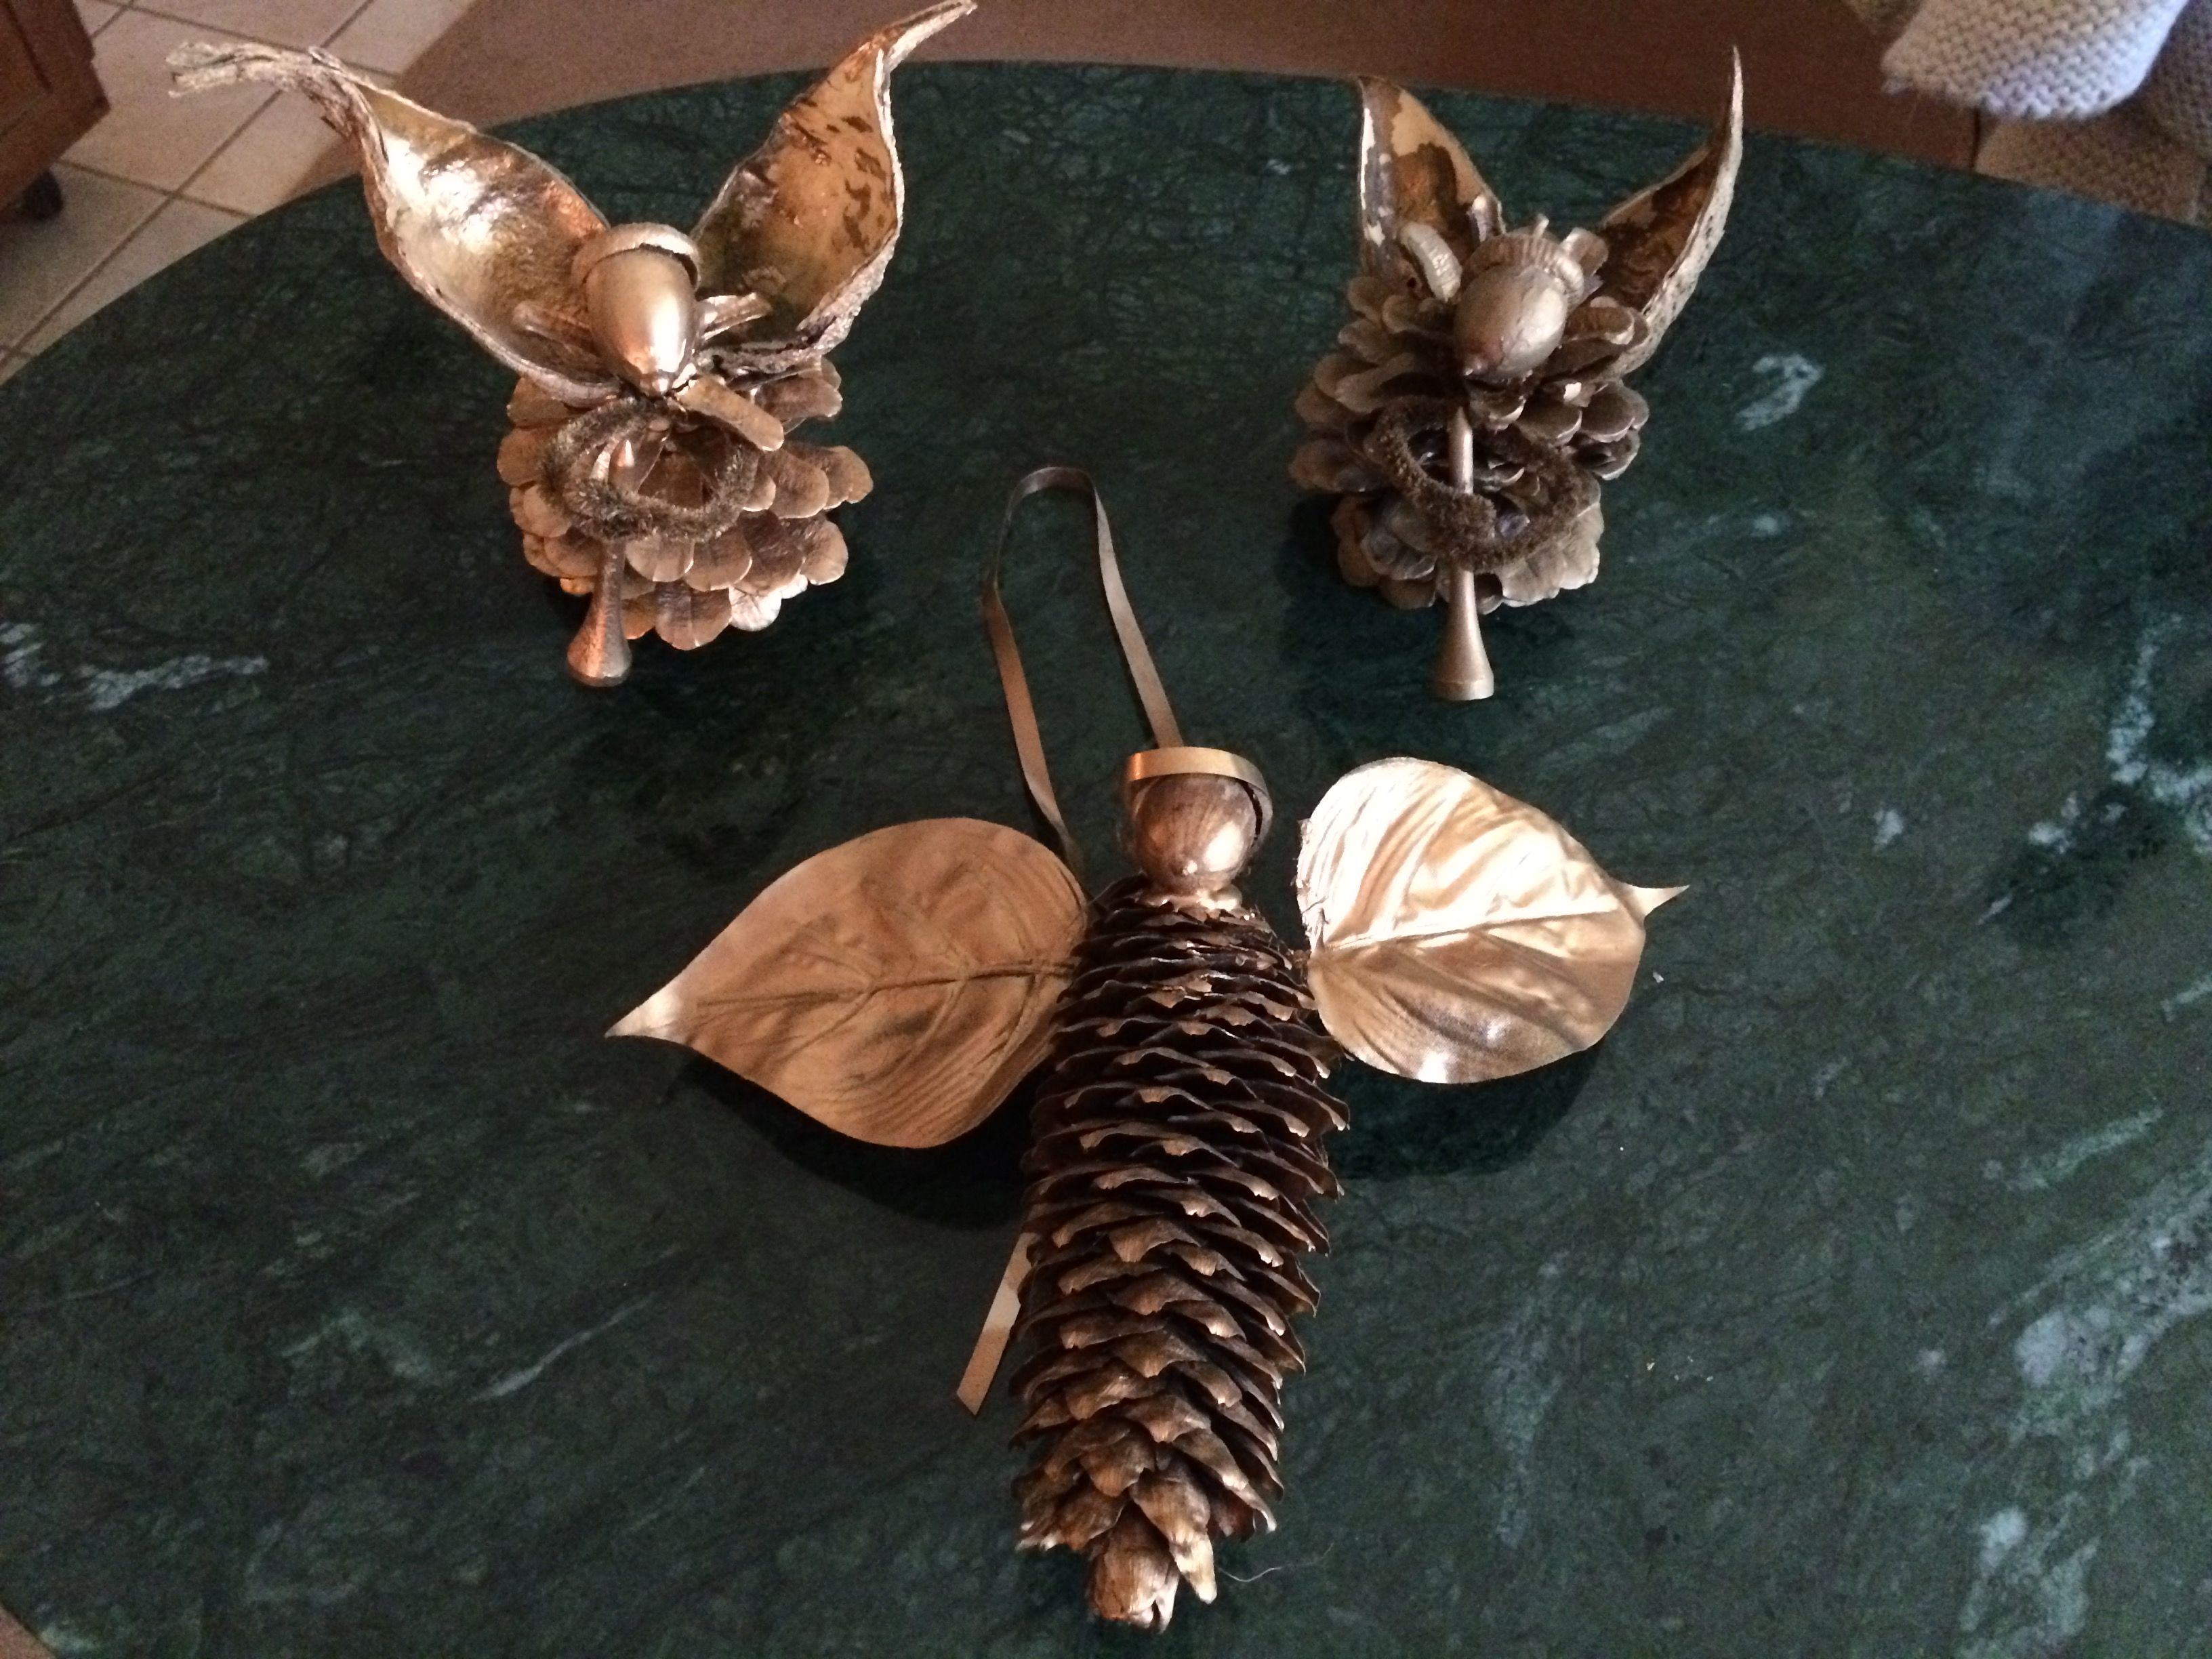 Vintage 1980s Pinecone Angels - 2 Figures + 1 Ornament by Annabelle\'s Angels